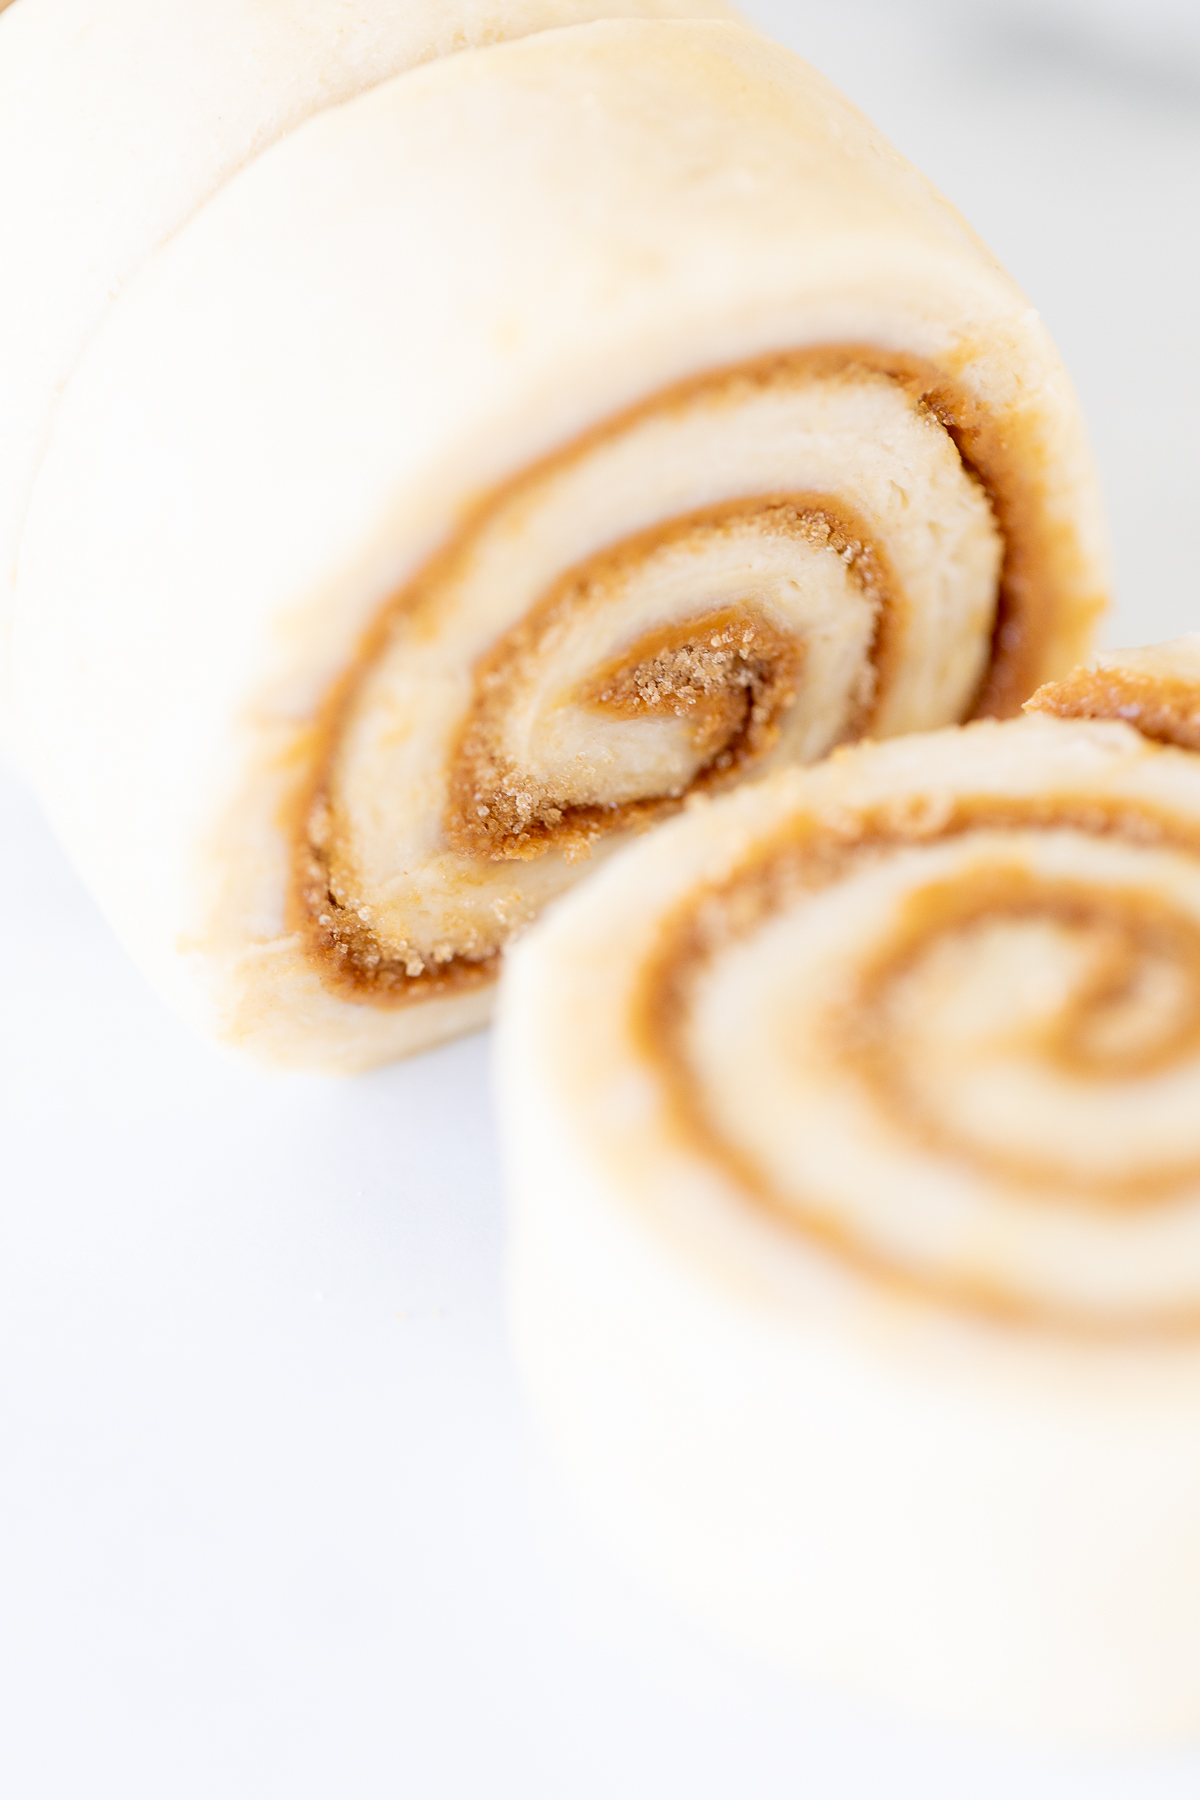 A slice of Cookie Butter Cinnamon Roll on a white surface.